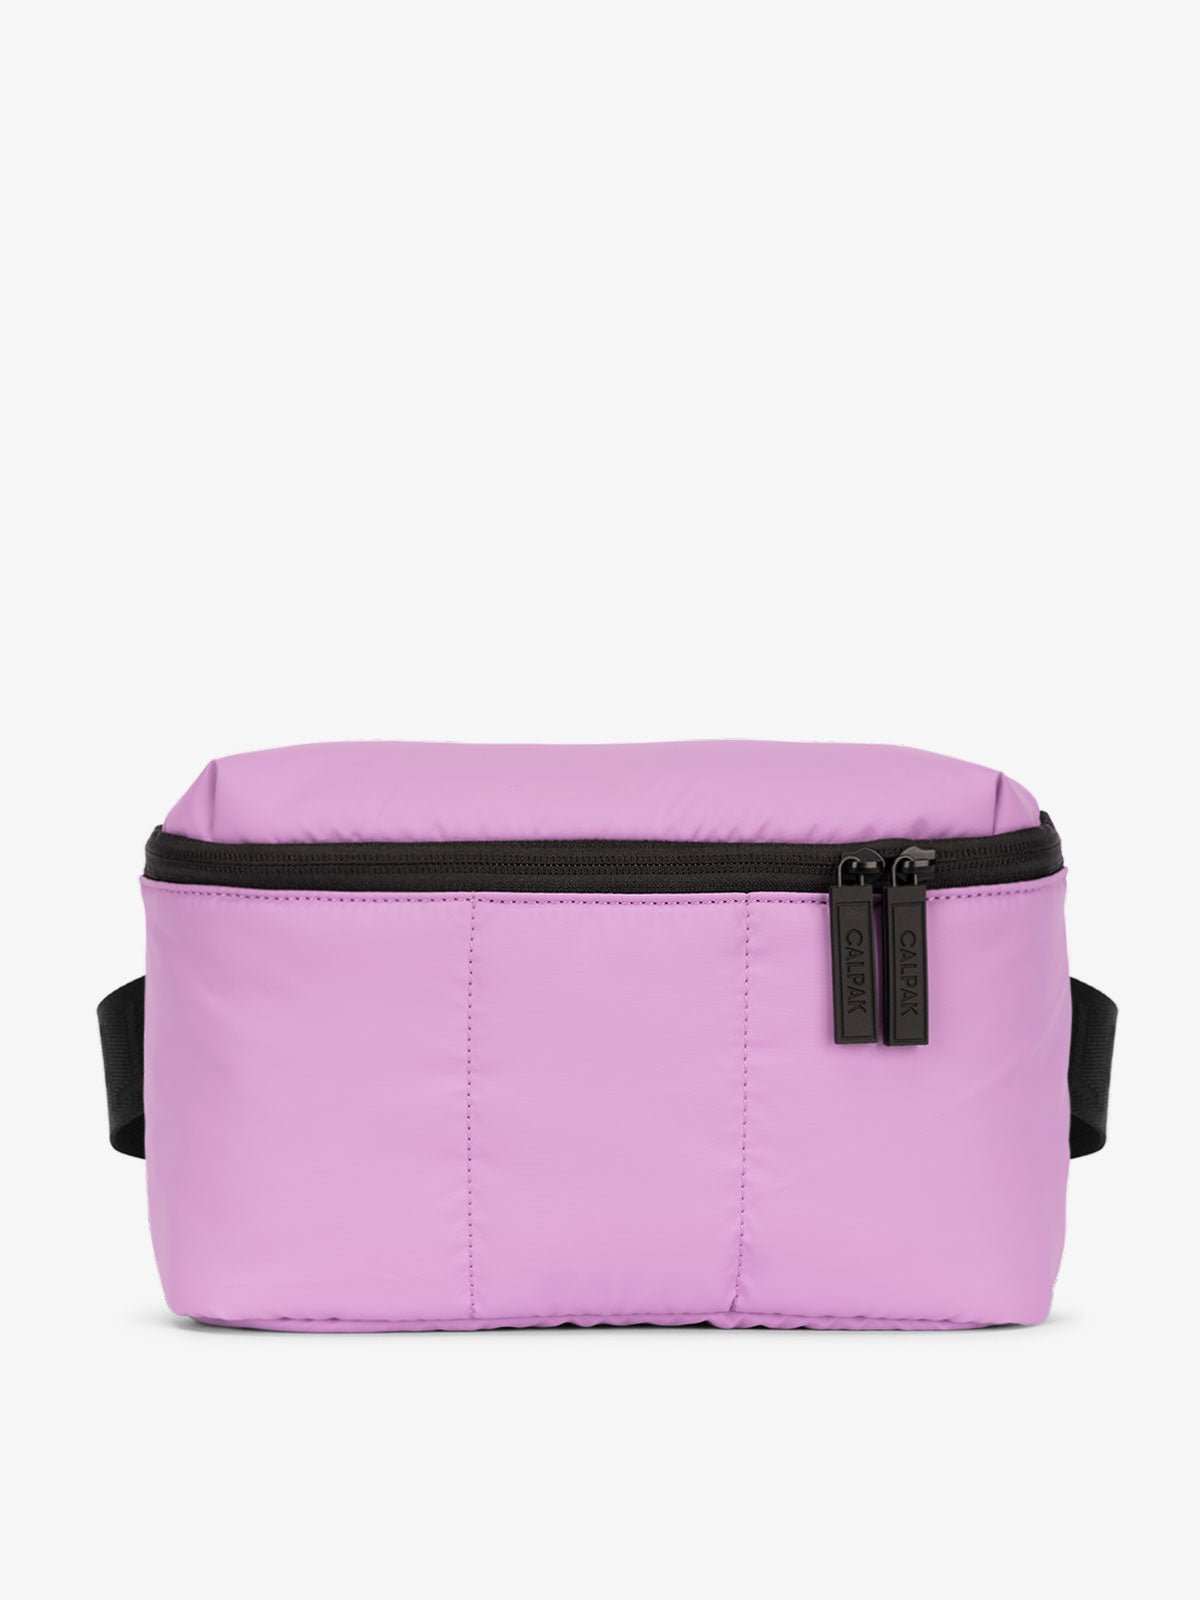 CALPAK Luka Belt Bag with soft puffy exterior in pink